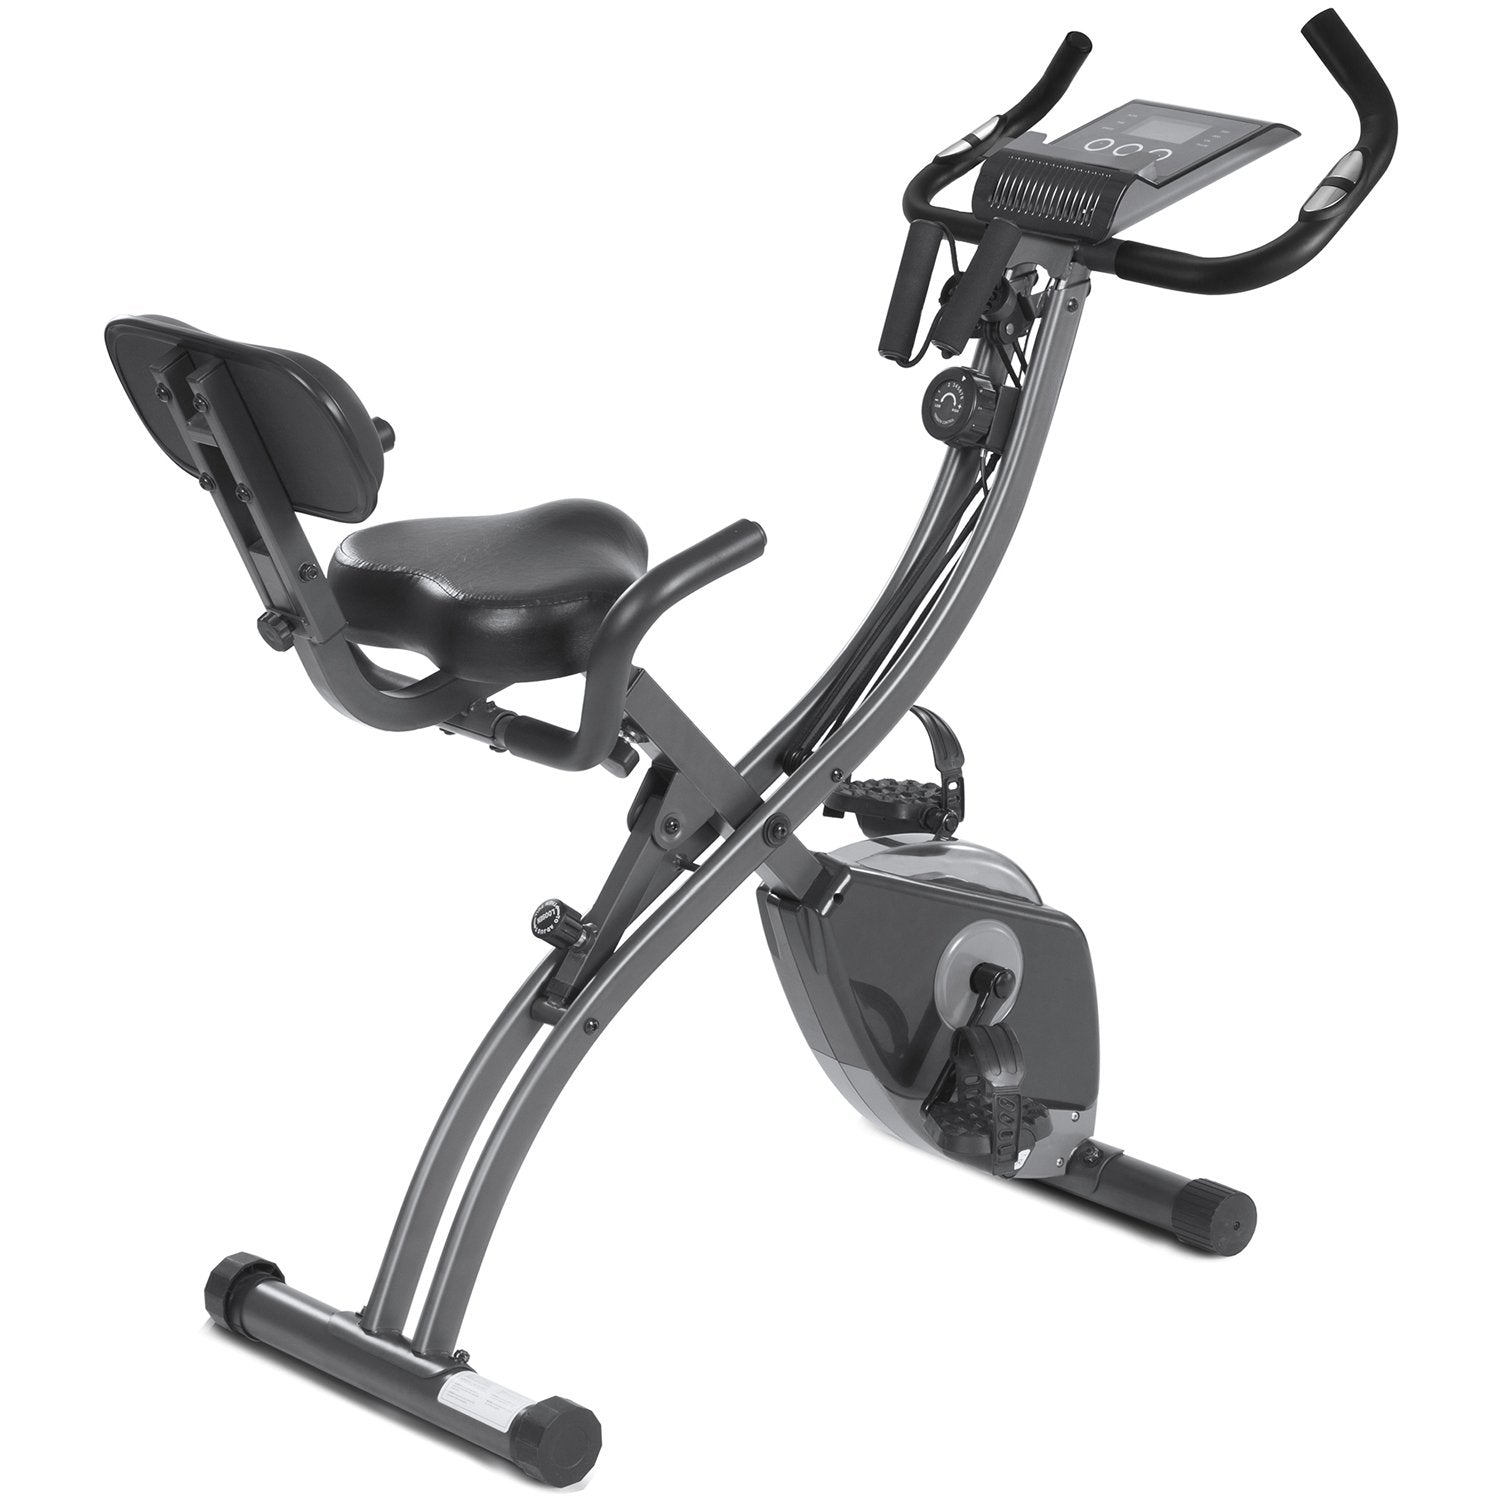 Load image into Gallery viewer, Exercise Bike Stationary Bike Folding Exercise Bike Foldable Magnetic Upright Recumbent Bike Cycling 3 in 1 Exercise Bike with Arm Resistance Bands Perfect for Men and Women at Home
